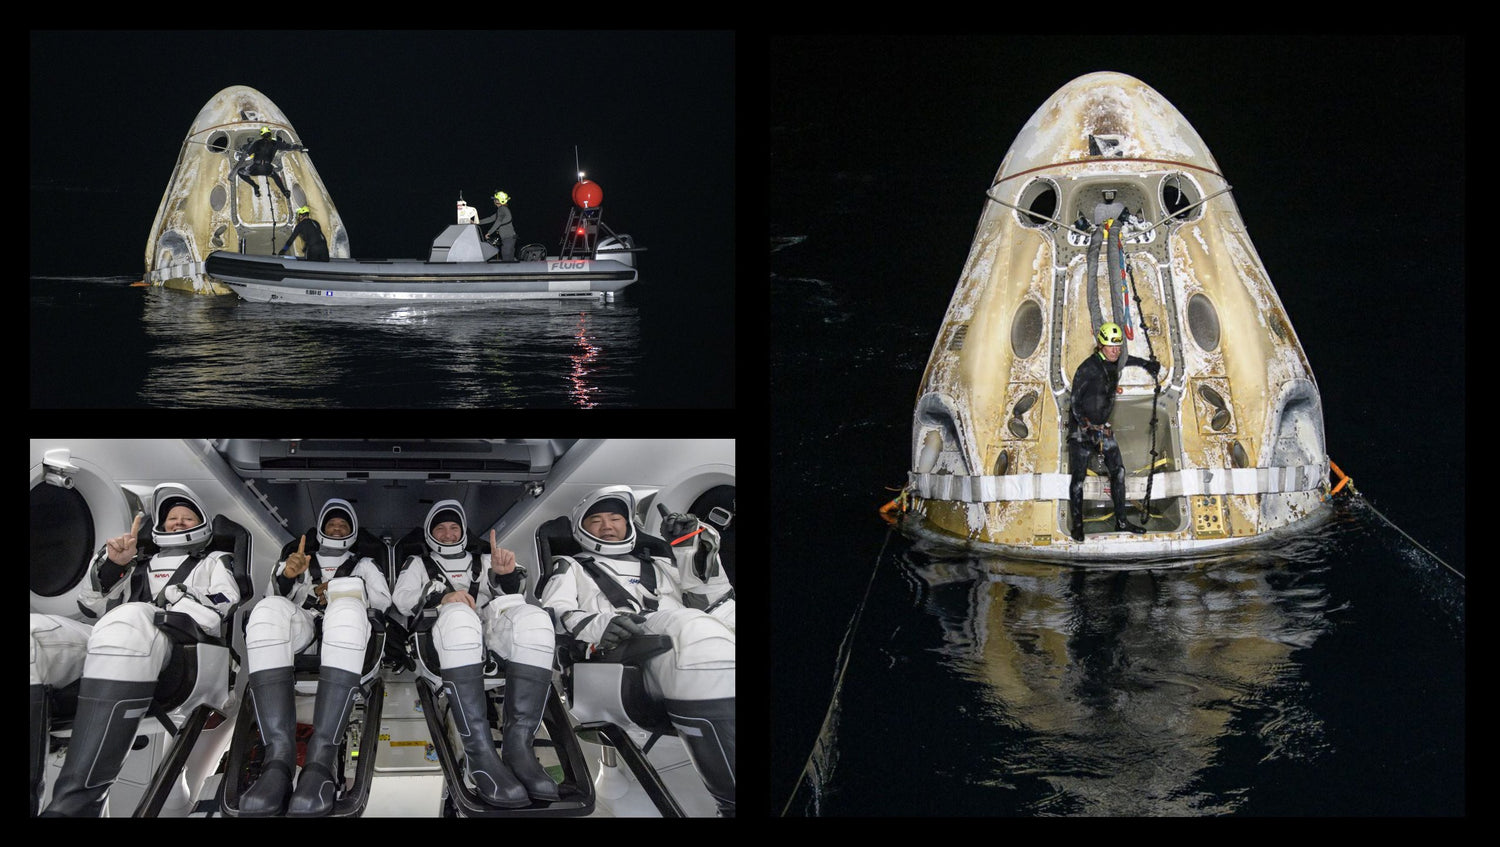 SpaceX Crew Dragon Safely Returns Crew-1 Astronauts With A Splashdown In The Gulf Of Mexico